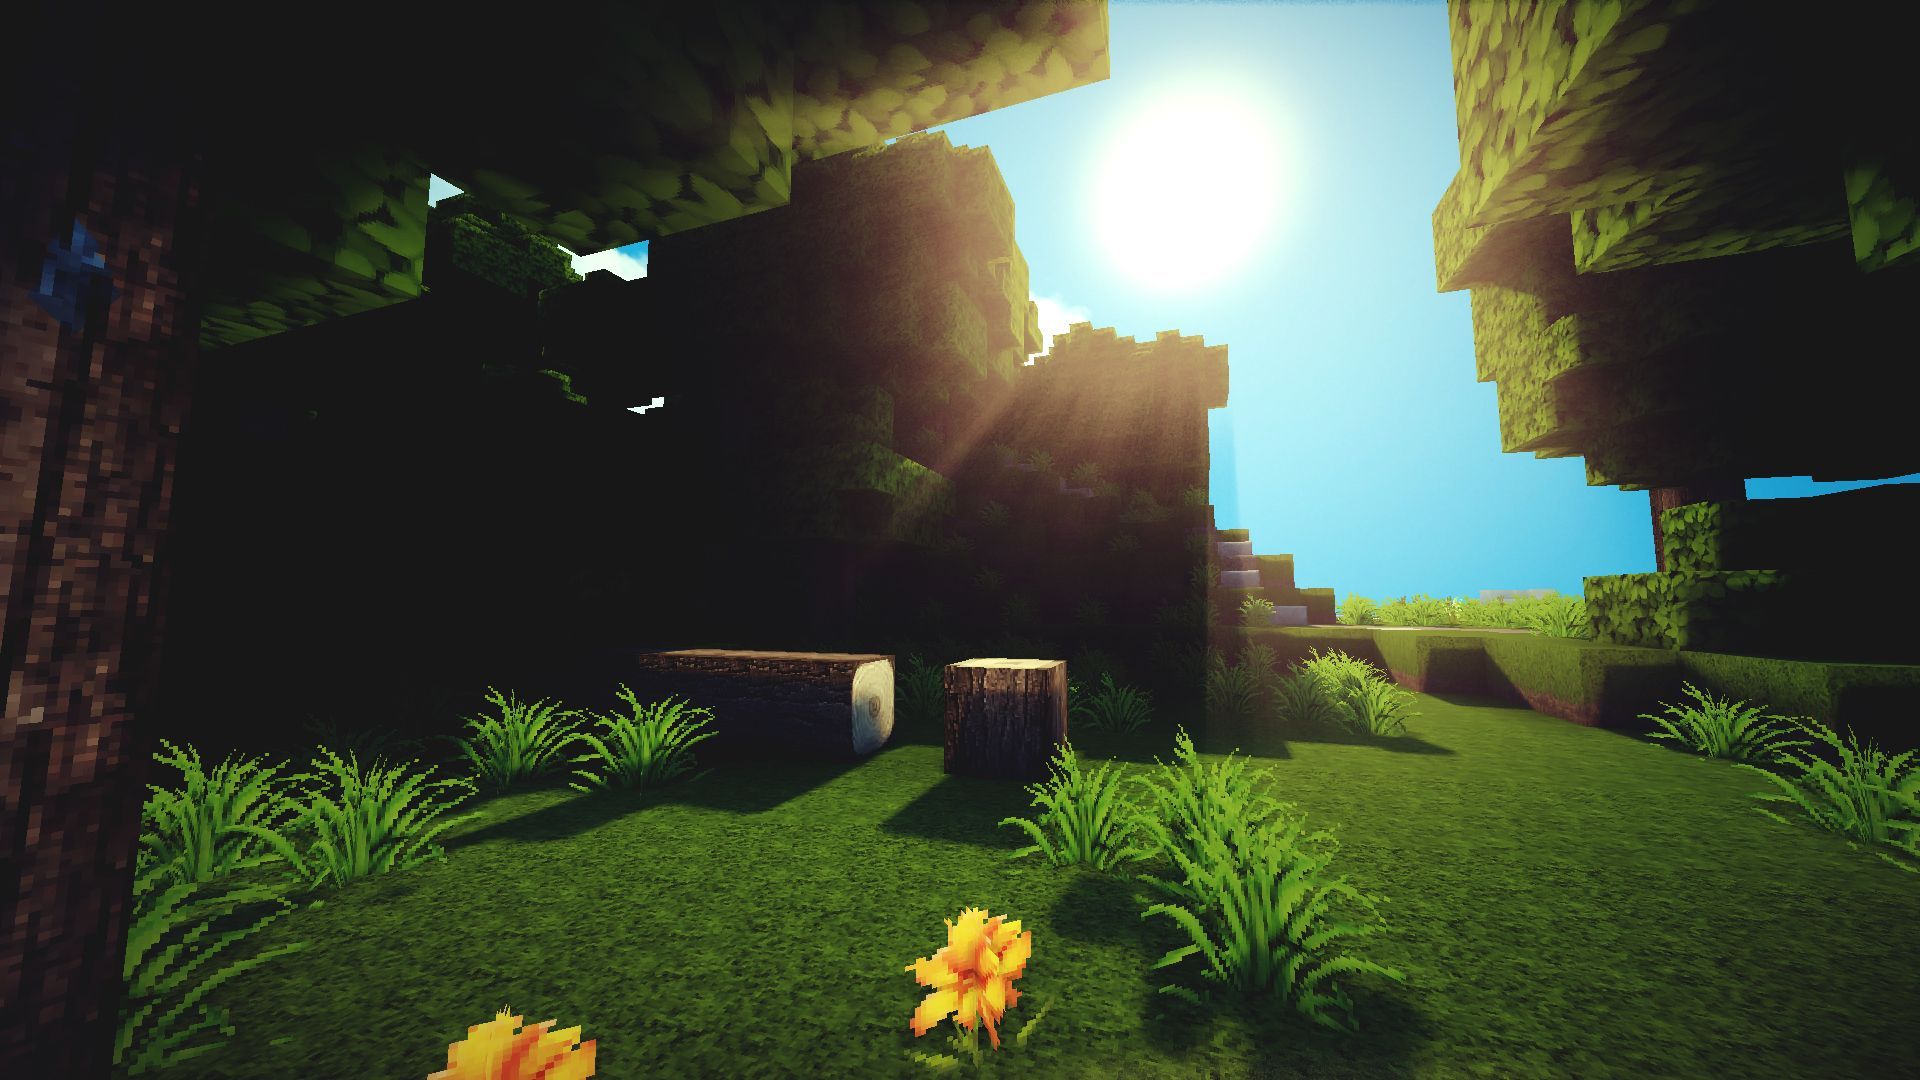 Awesome minecraft Background Free Wallpapers 12308 - HD Wallpapers ...